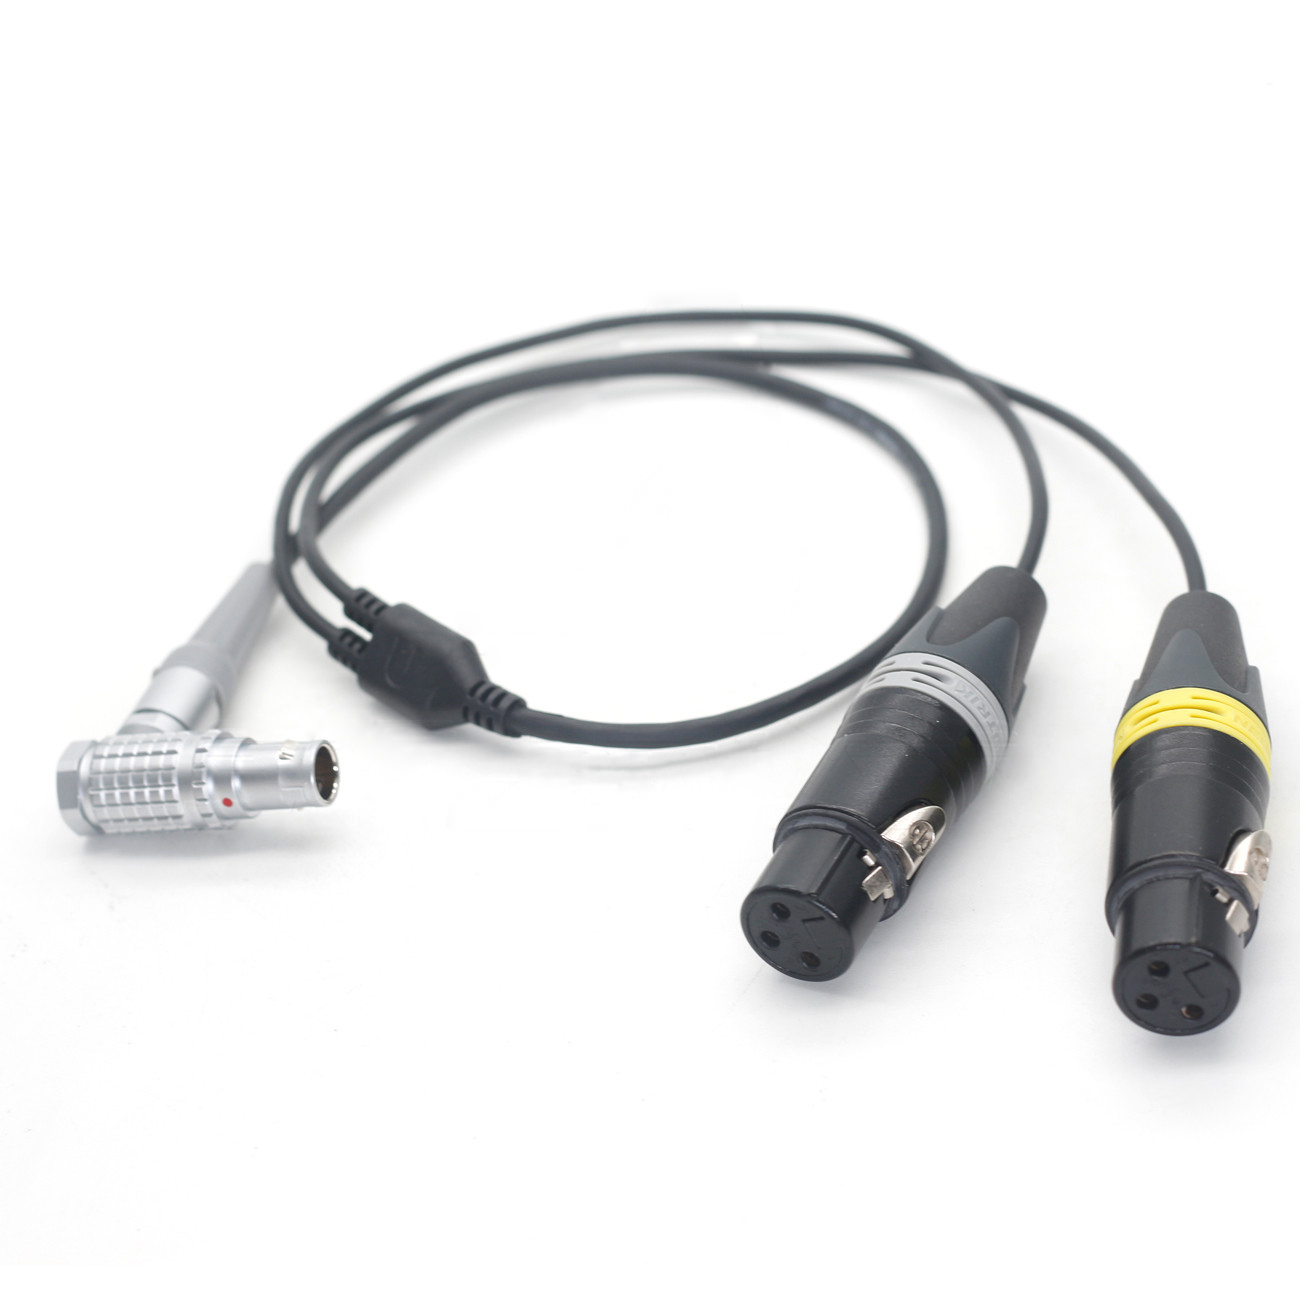 Cyclone/Perfect For Cable, XLR-3M to Angled XLR-3F, 260mm - Studio General